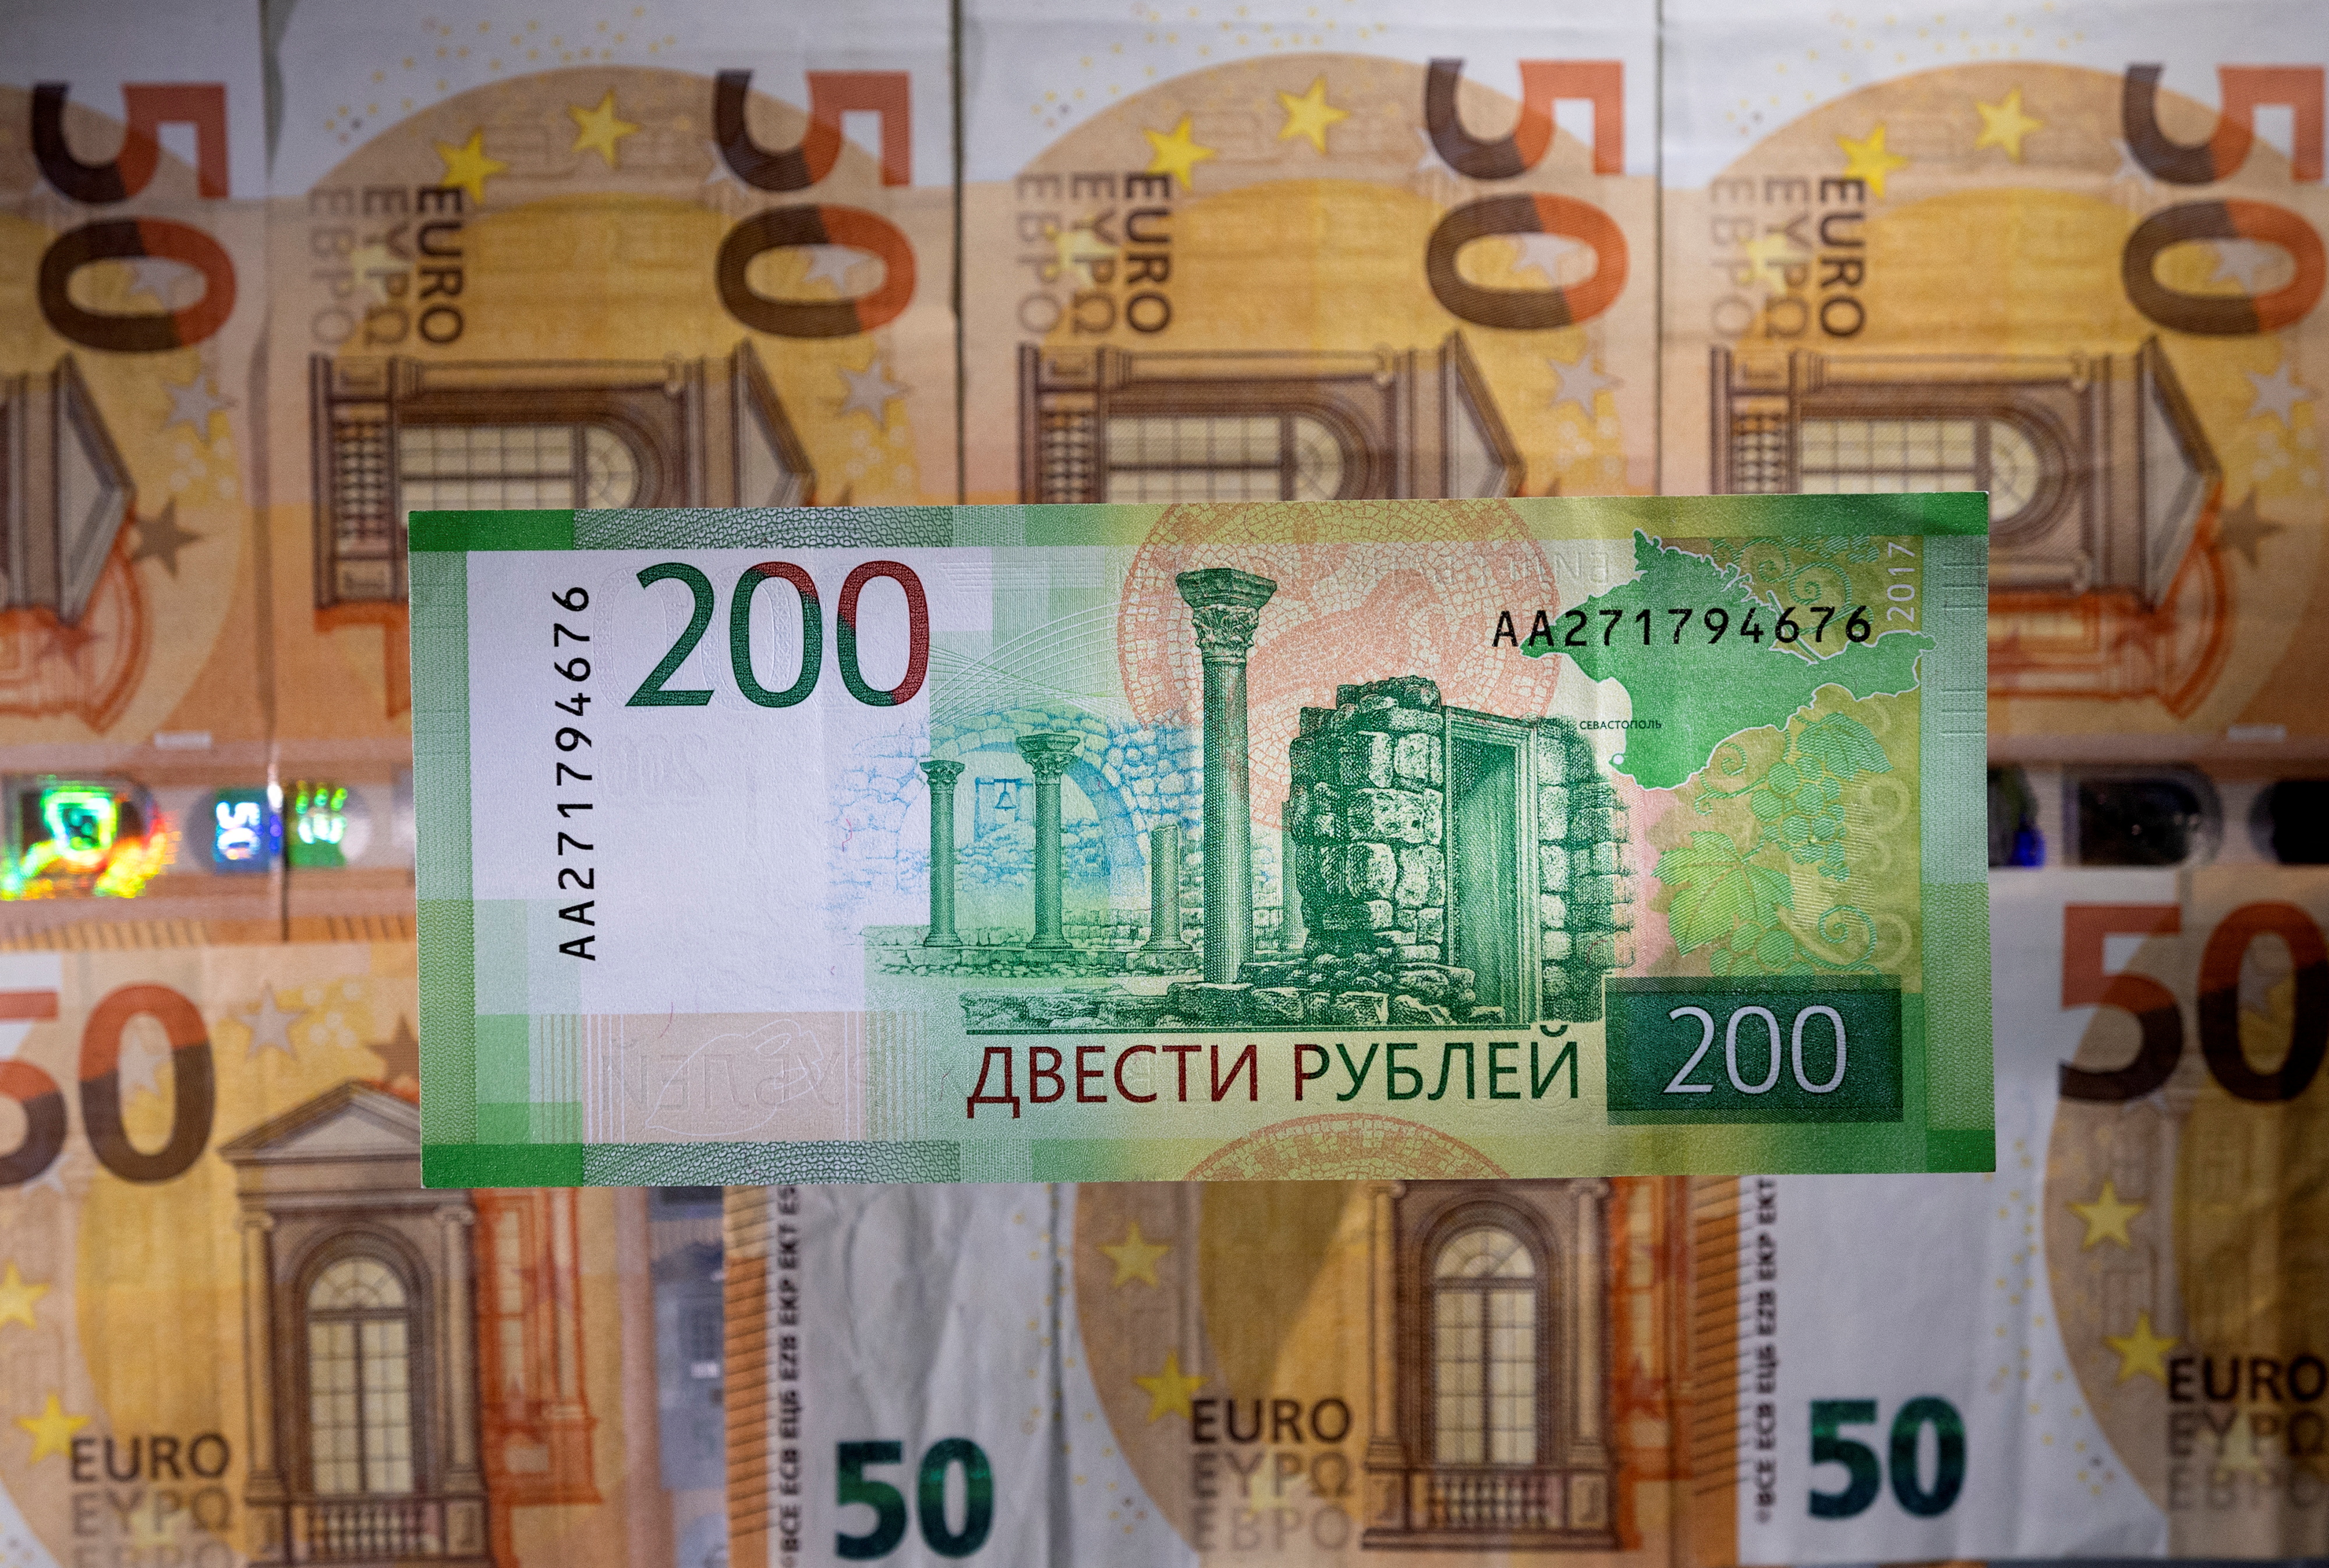 Illustration shows a Russian rouble banknote placed on euro banknotes